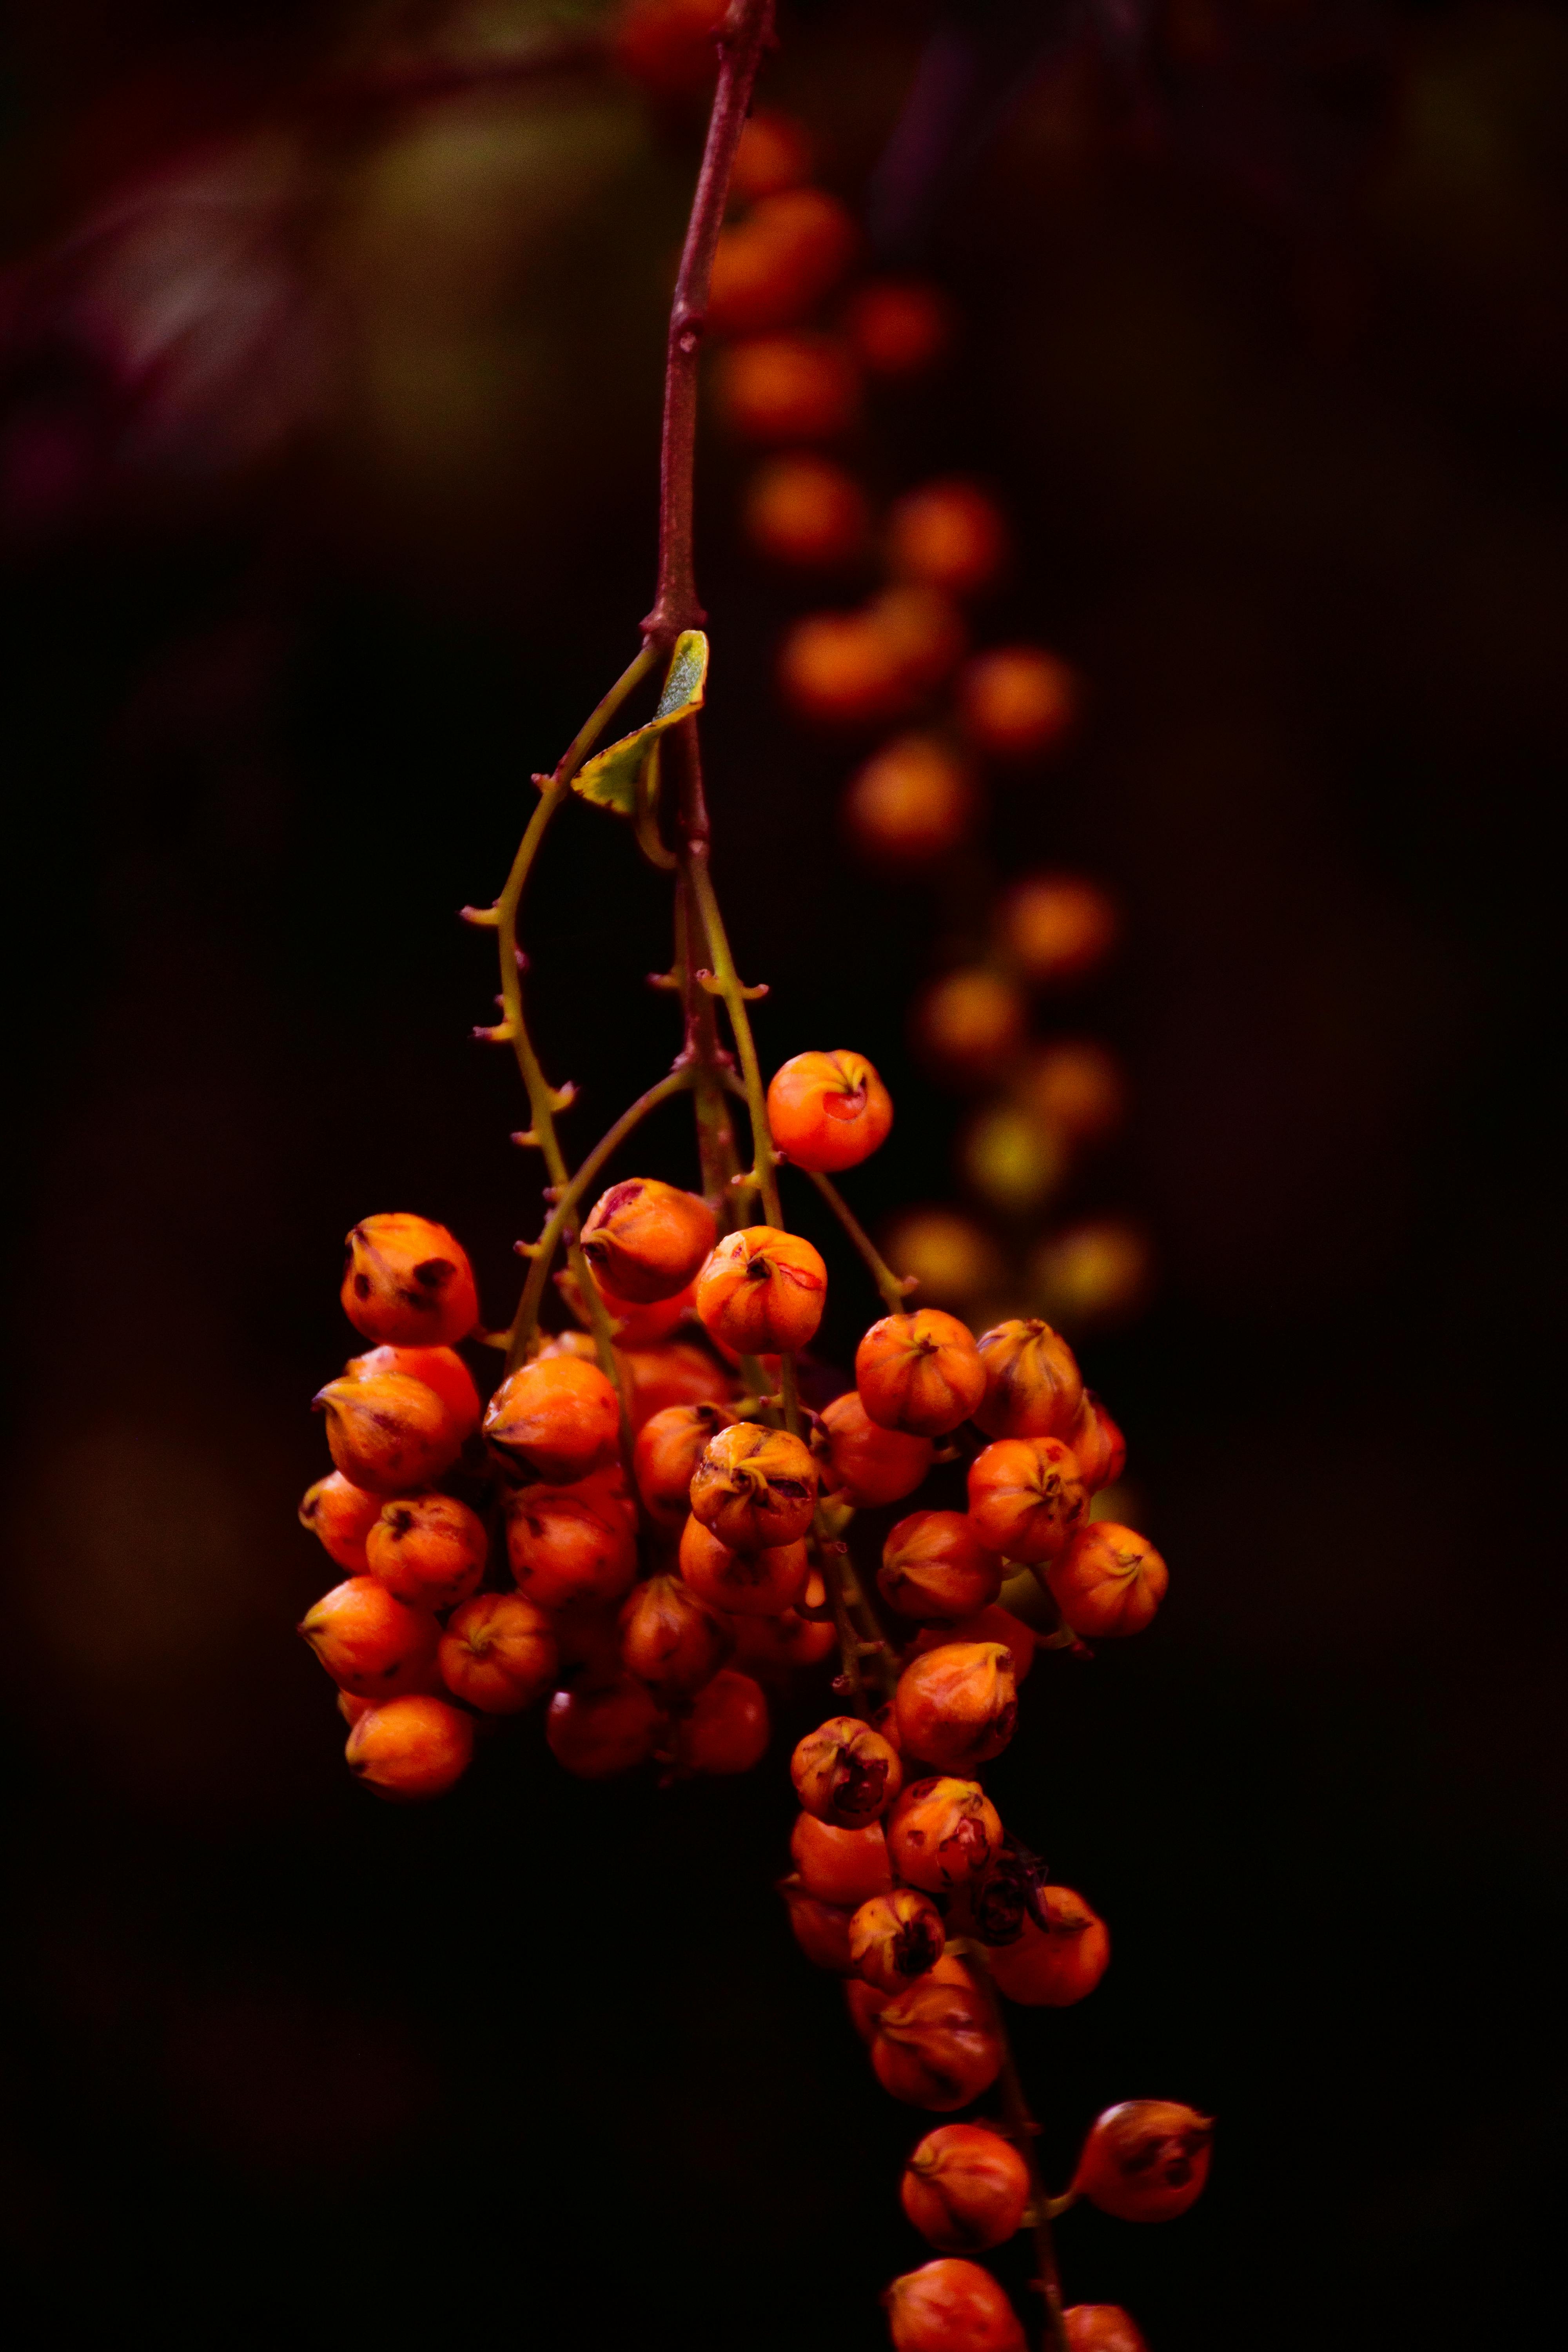 Free stock photo of africa, Berries in Africa, Many yellow berries